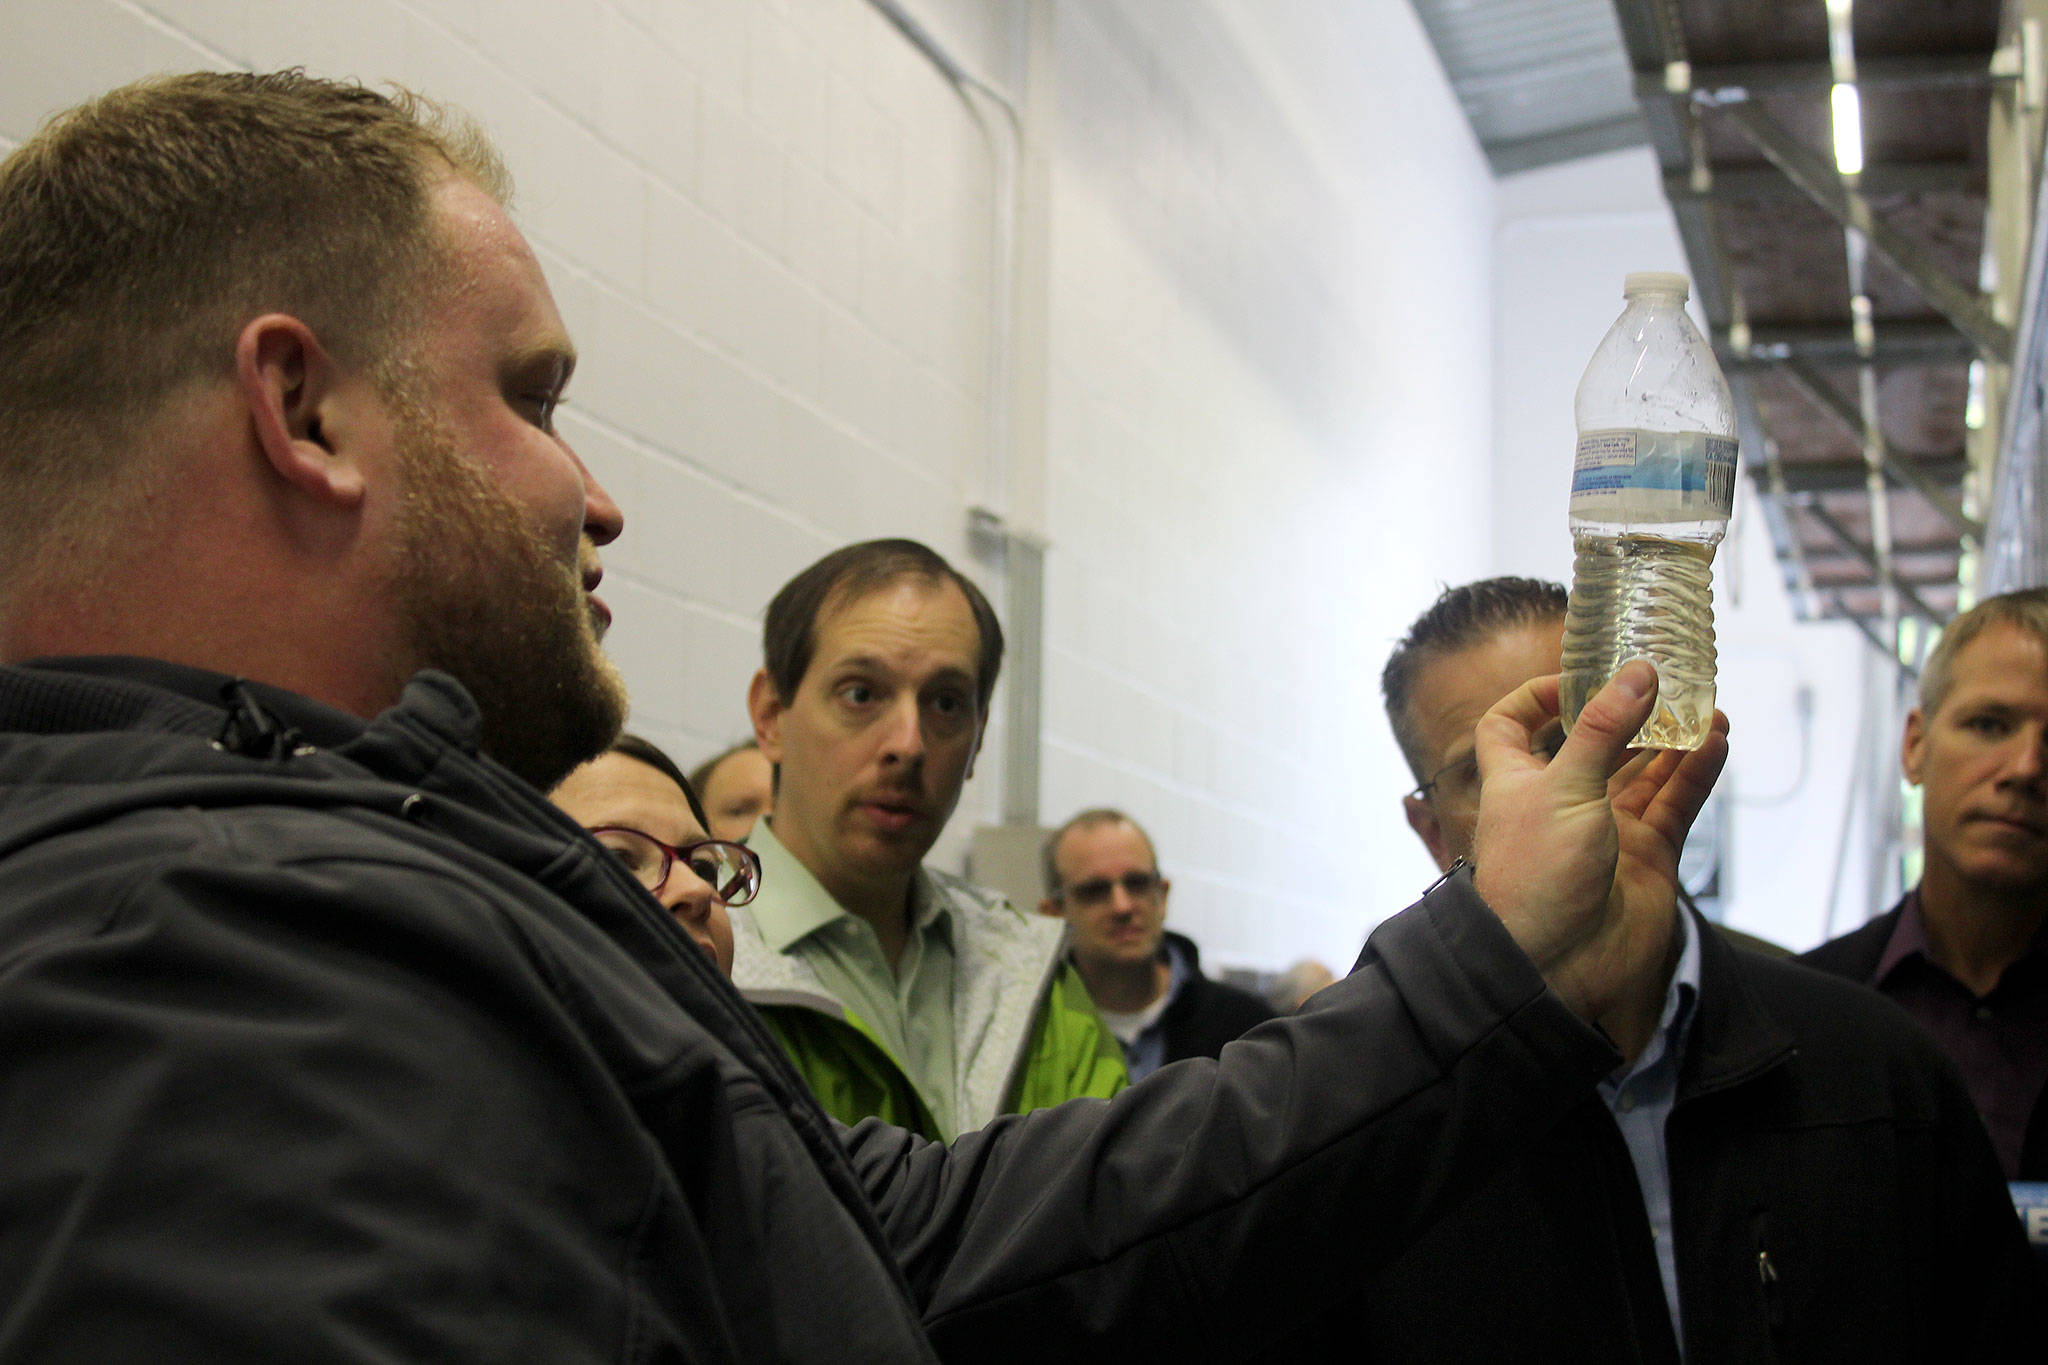 Luke Thurston, KPUD staff member, shows a crowd of people what the water looks like after being treated at the Port Gamble Resource Recovery Facility.                                Michelle Beahm / Kitsap News Group